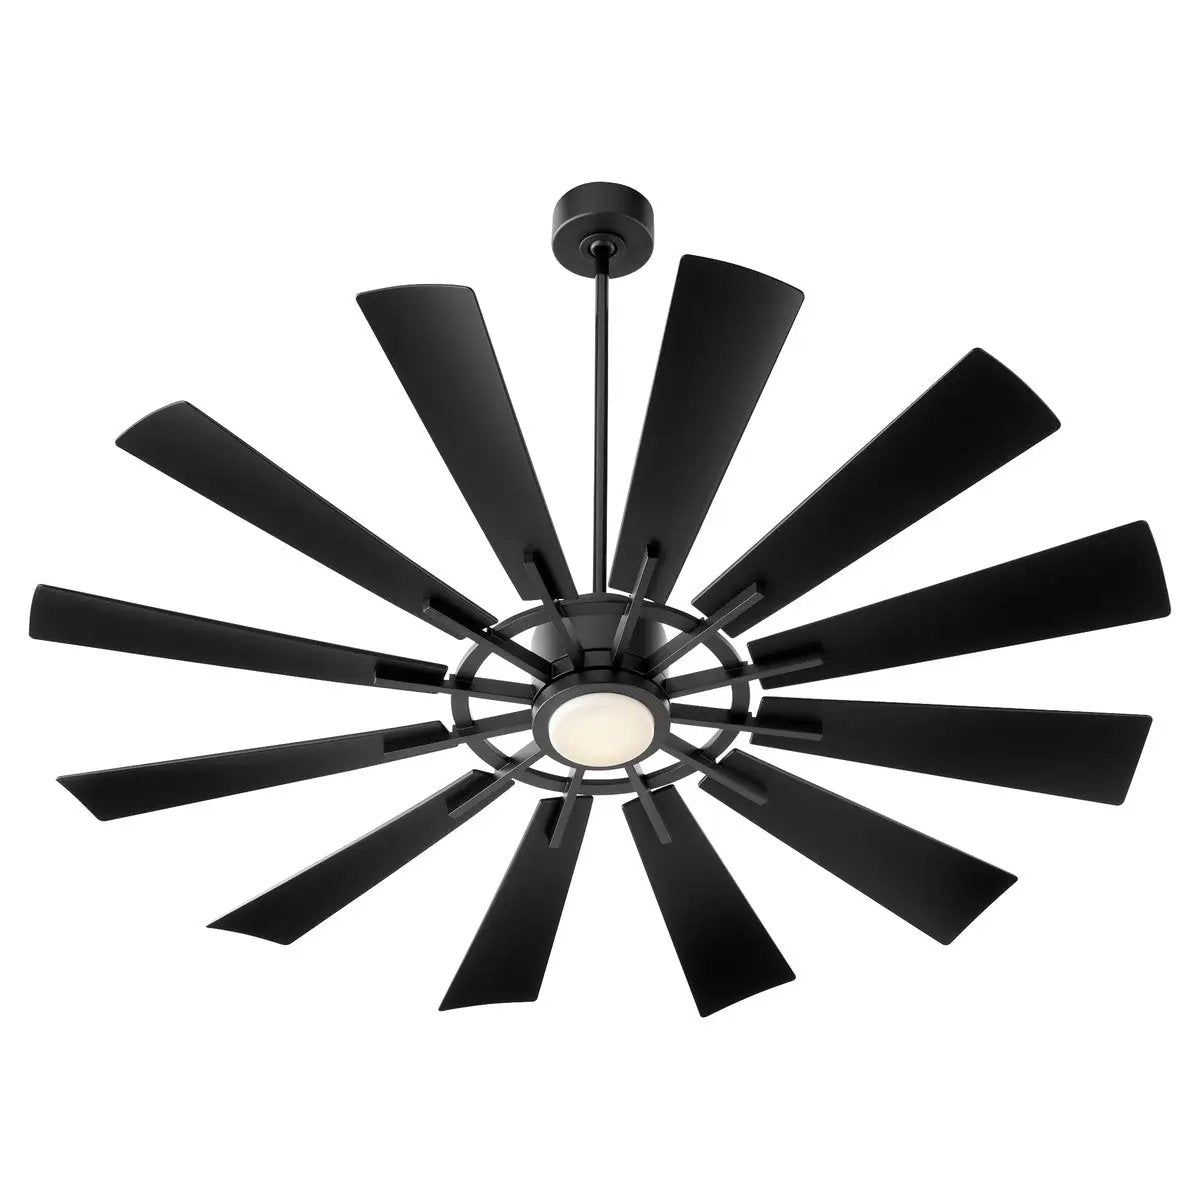 Outdoor Ceiling Fan with Light, featuring a multi-blade system attached to a dark chromatic housing motor and iron elements. Designed for high-performance outdoor air circulation. Perfect for any indoor or outdoor application. 60" blade span, 6-speed options.